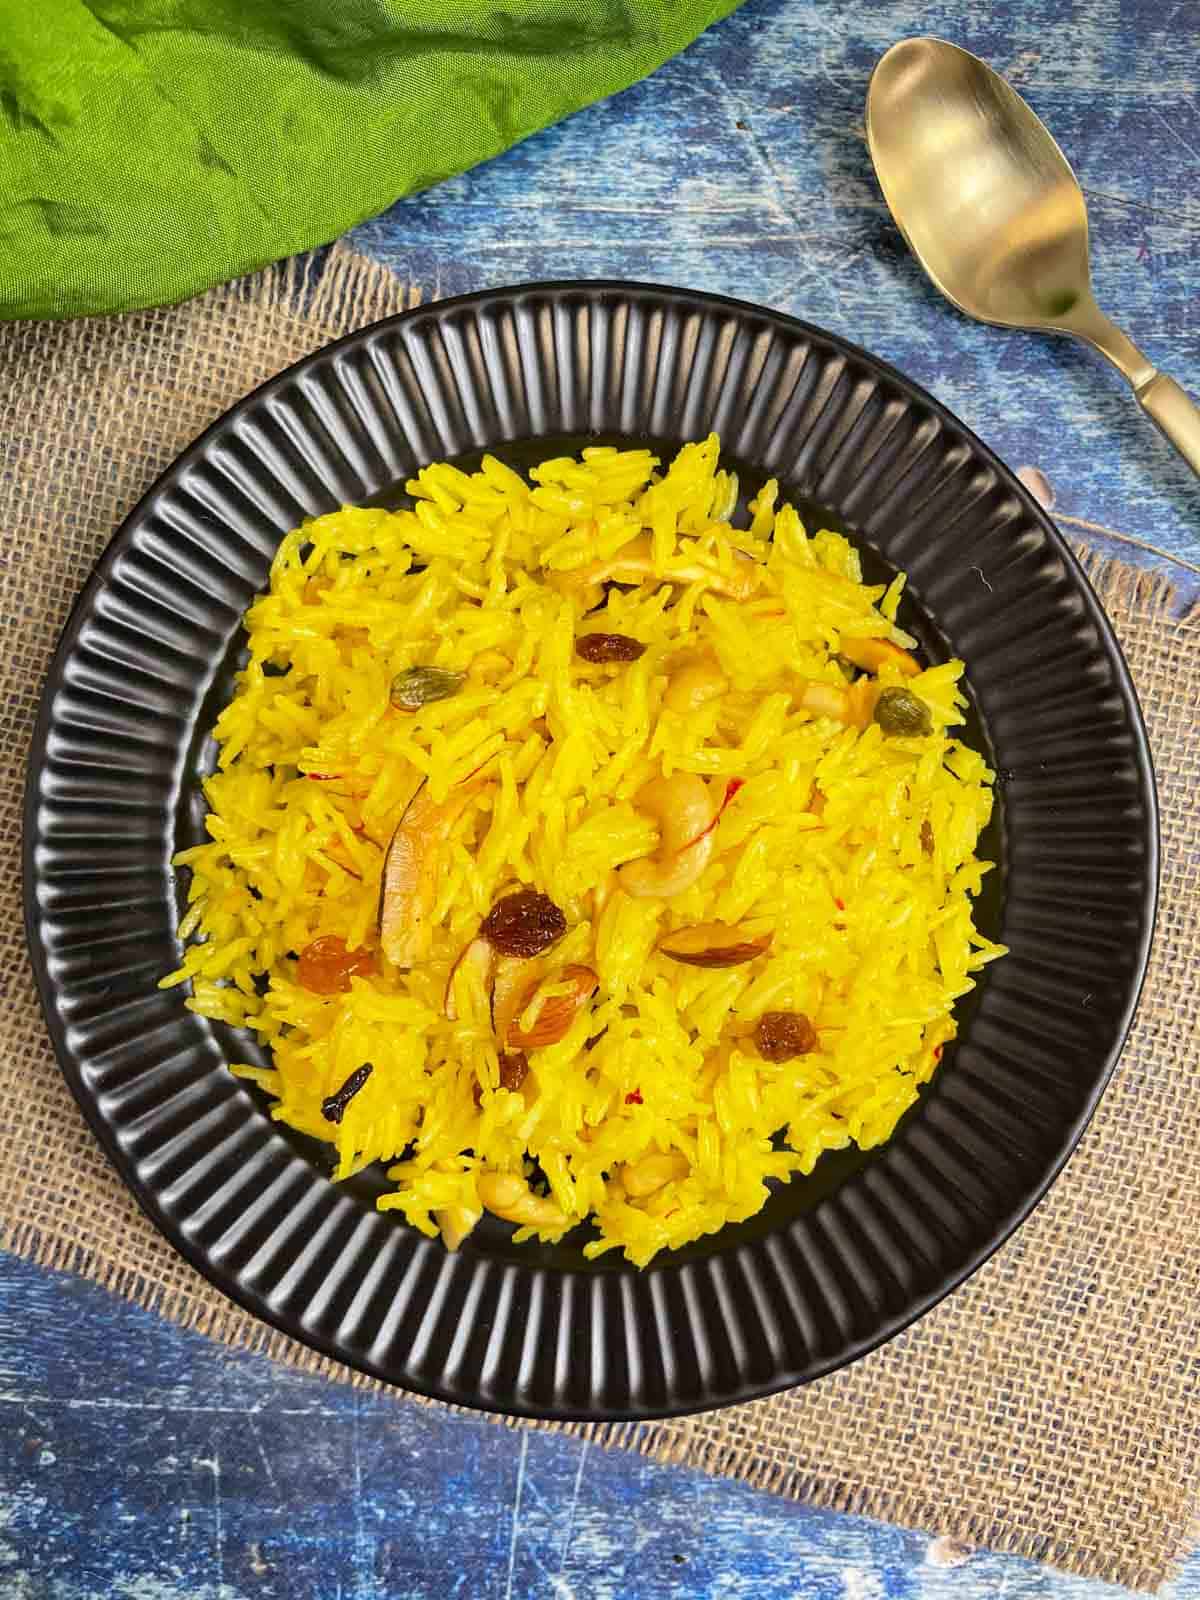 zarda pulao (meethe chawal/sweet rice) served in a plate with spoon on the side